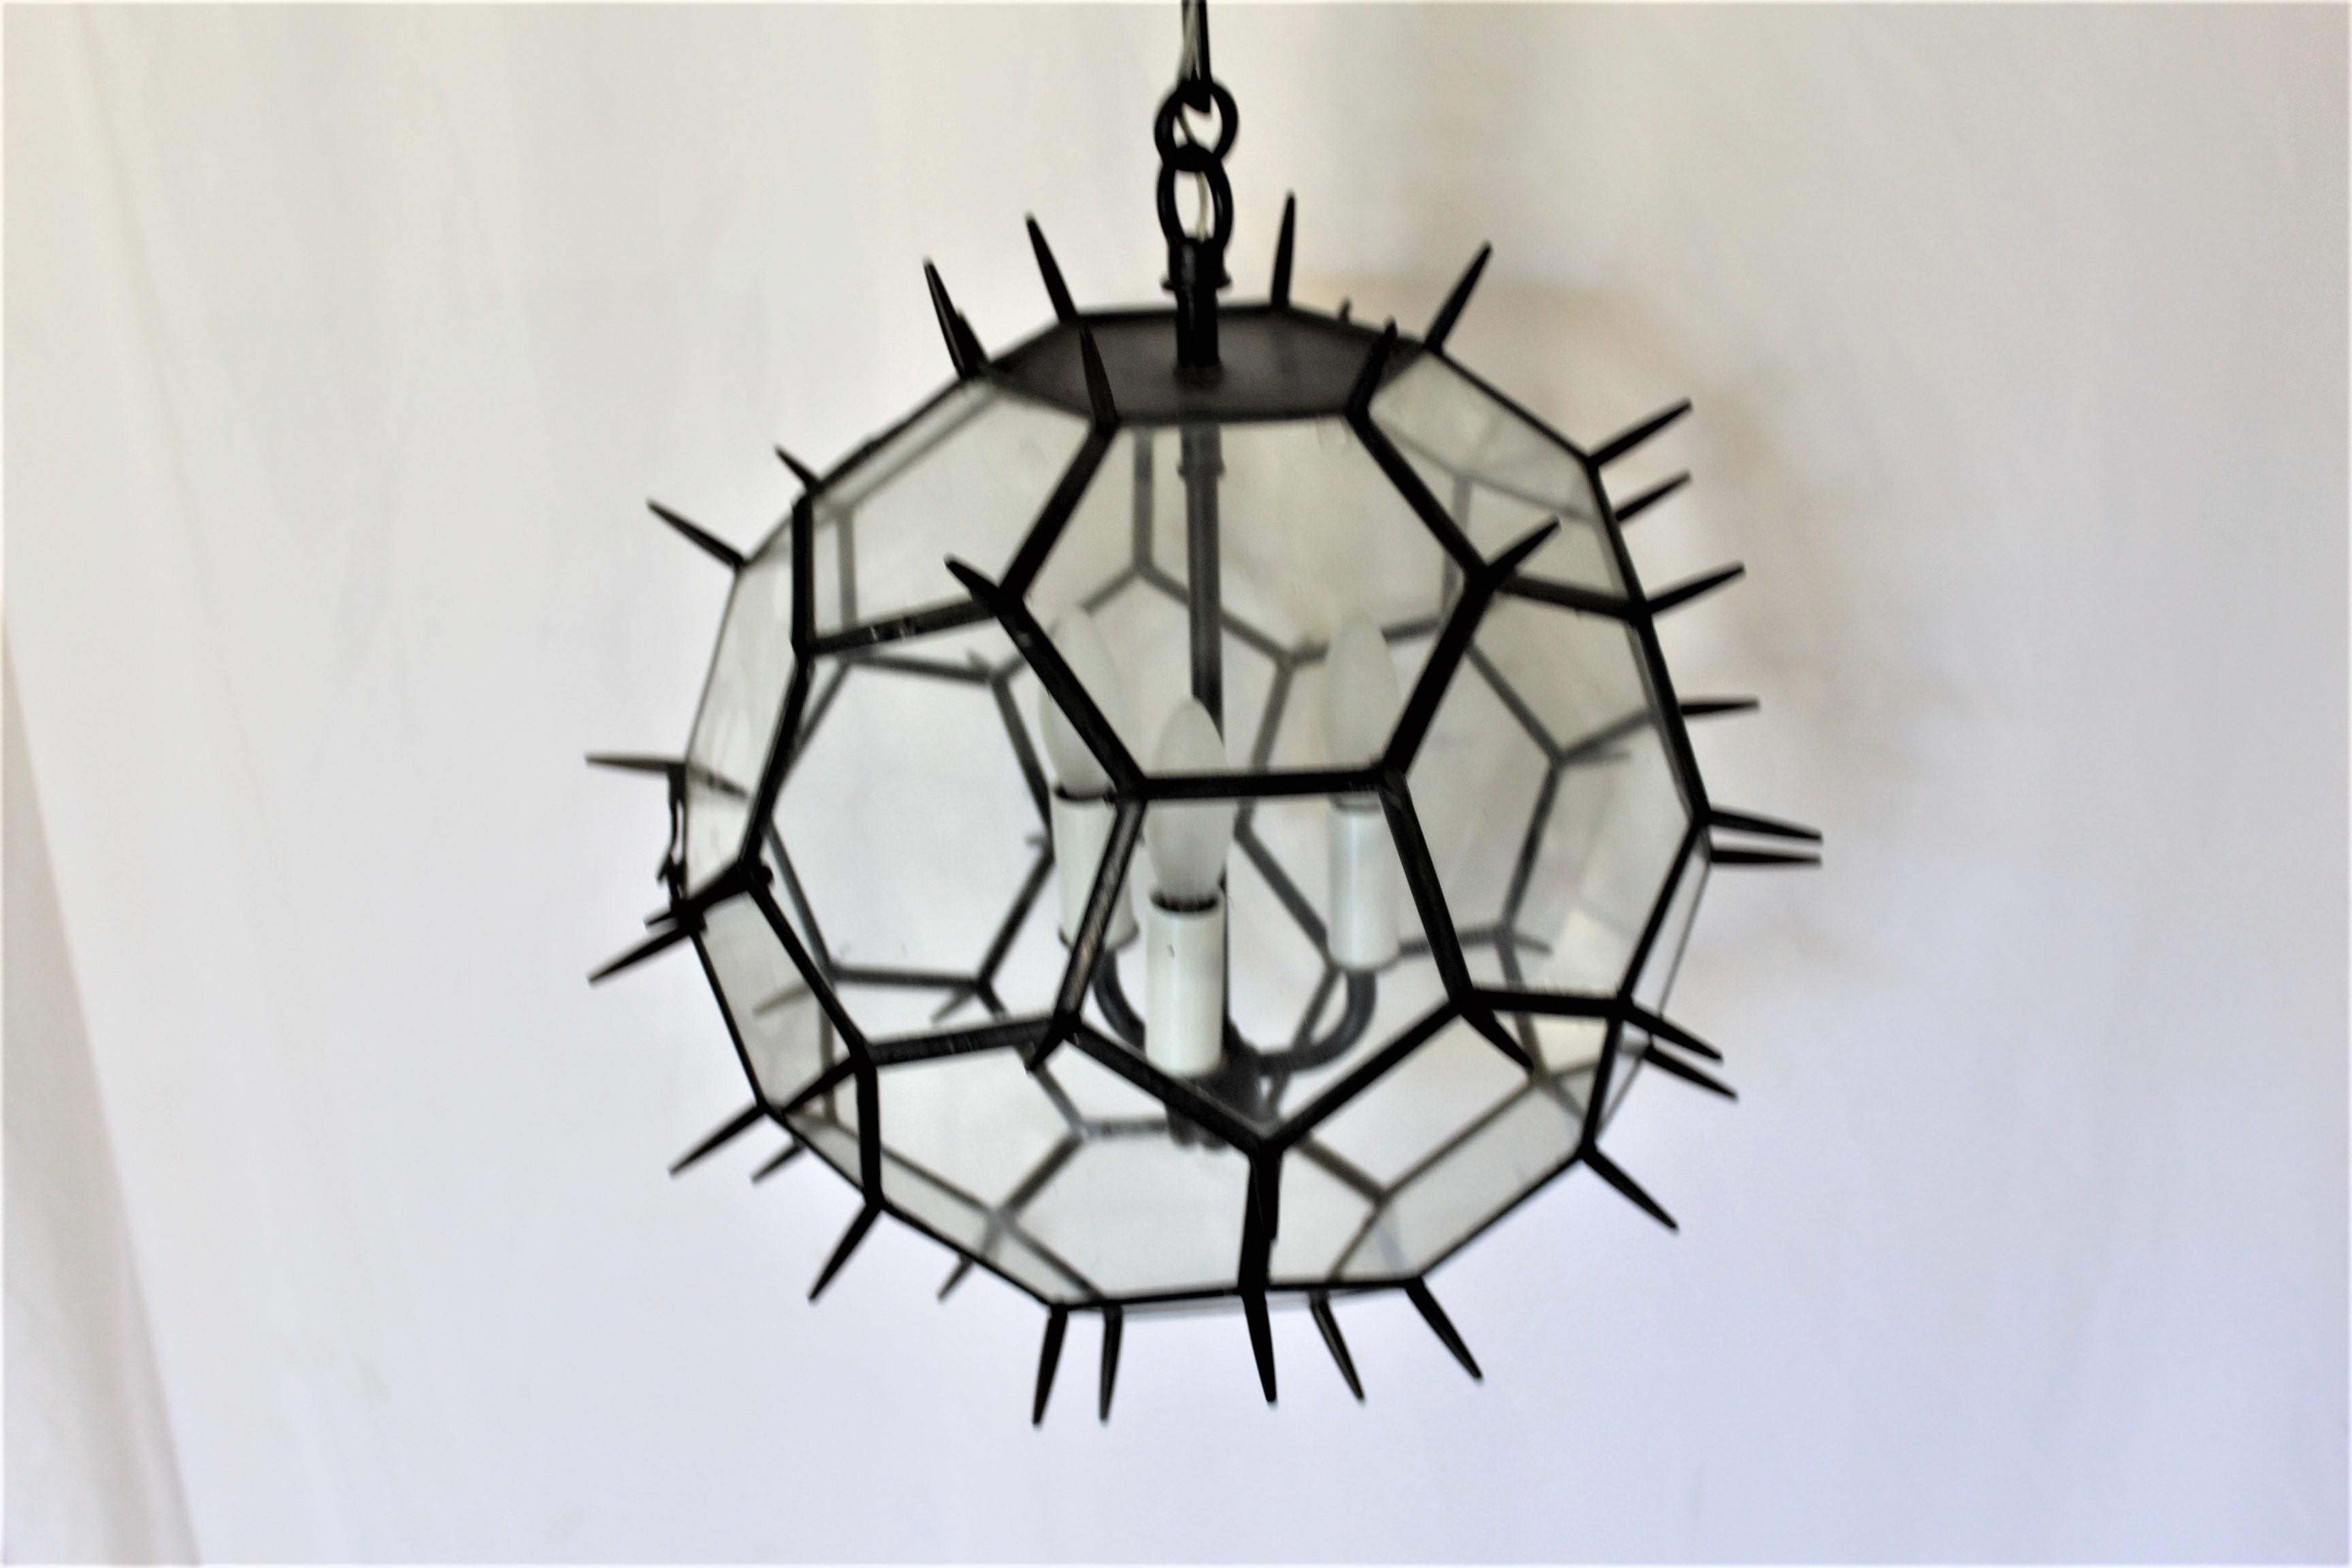 A Custom designed and Custom made Pendent in the shape of a (Soccer Ball ) with applied spiky points ! Looks neat when lit up ! No others were ever made like this. A one of a kind now ! This is the Showroom sample, never sold and put into storage